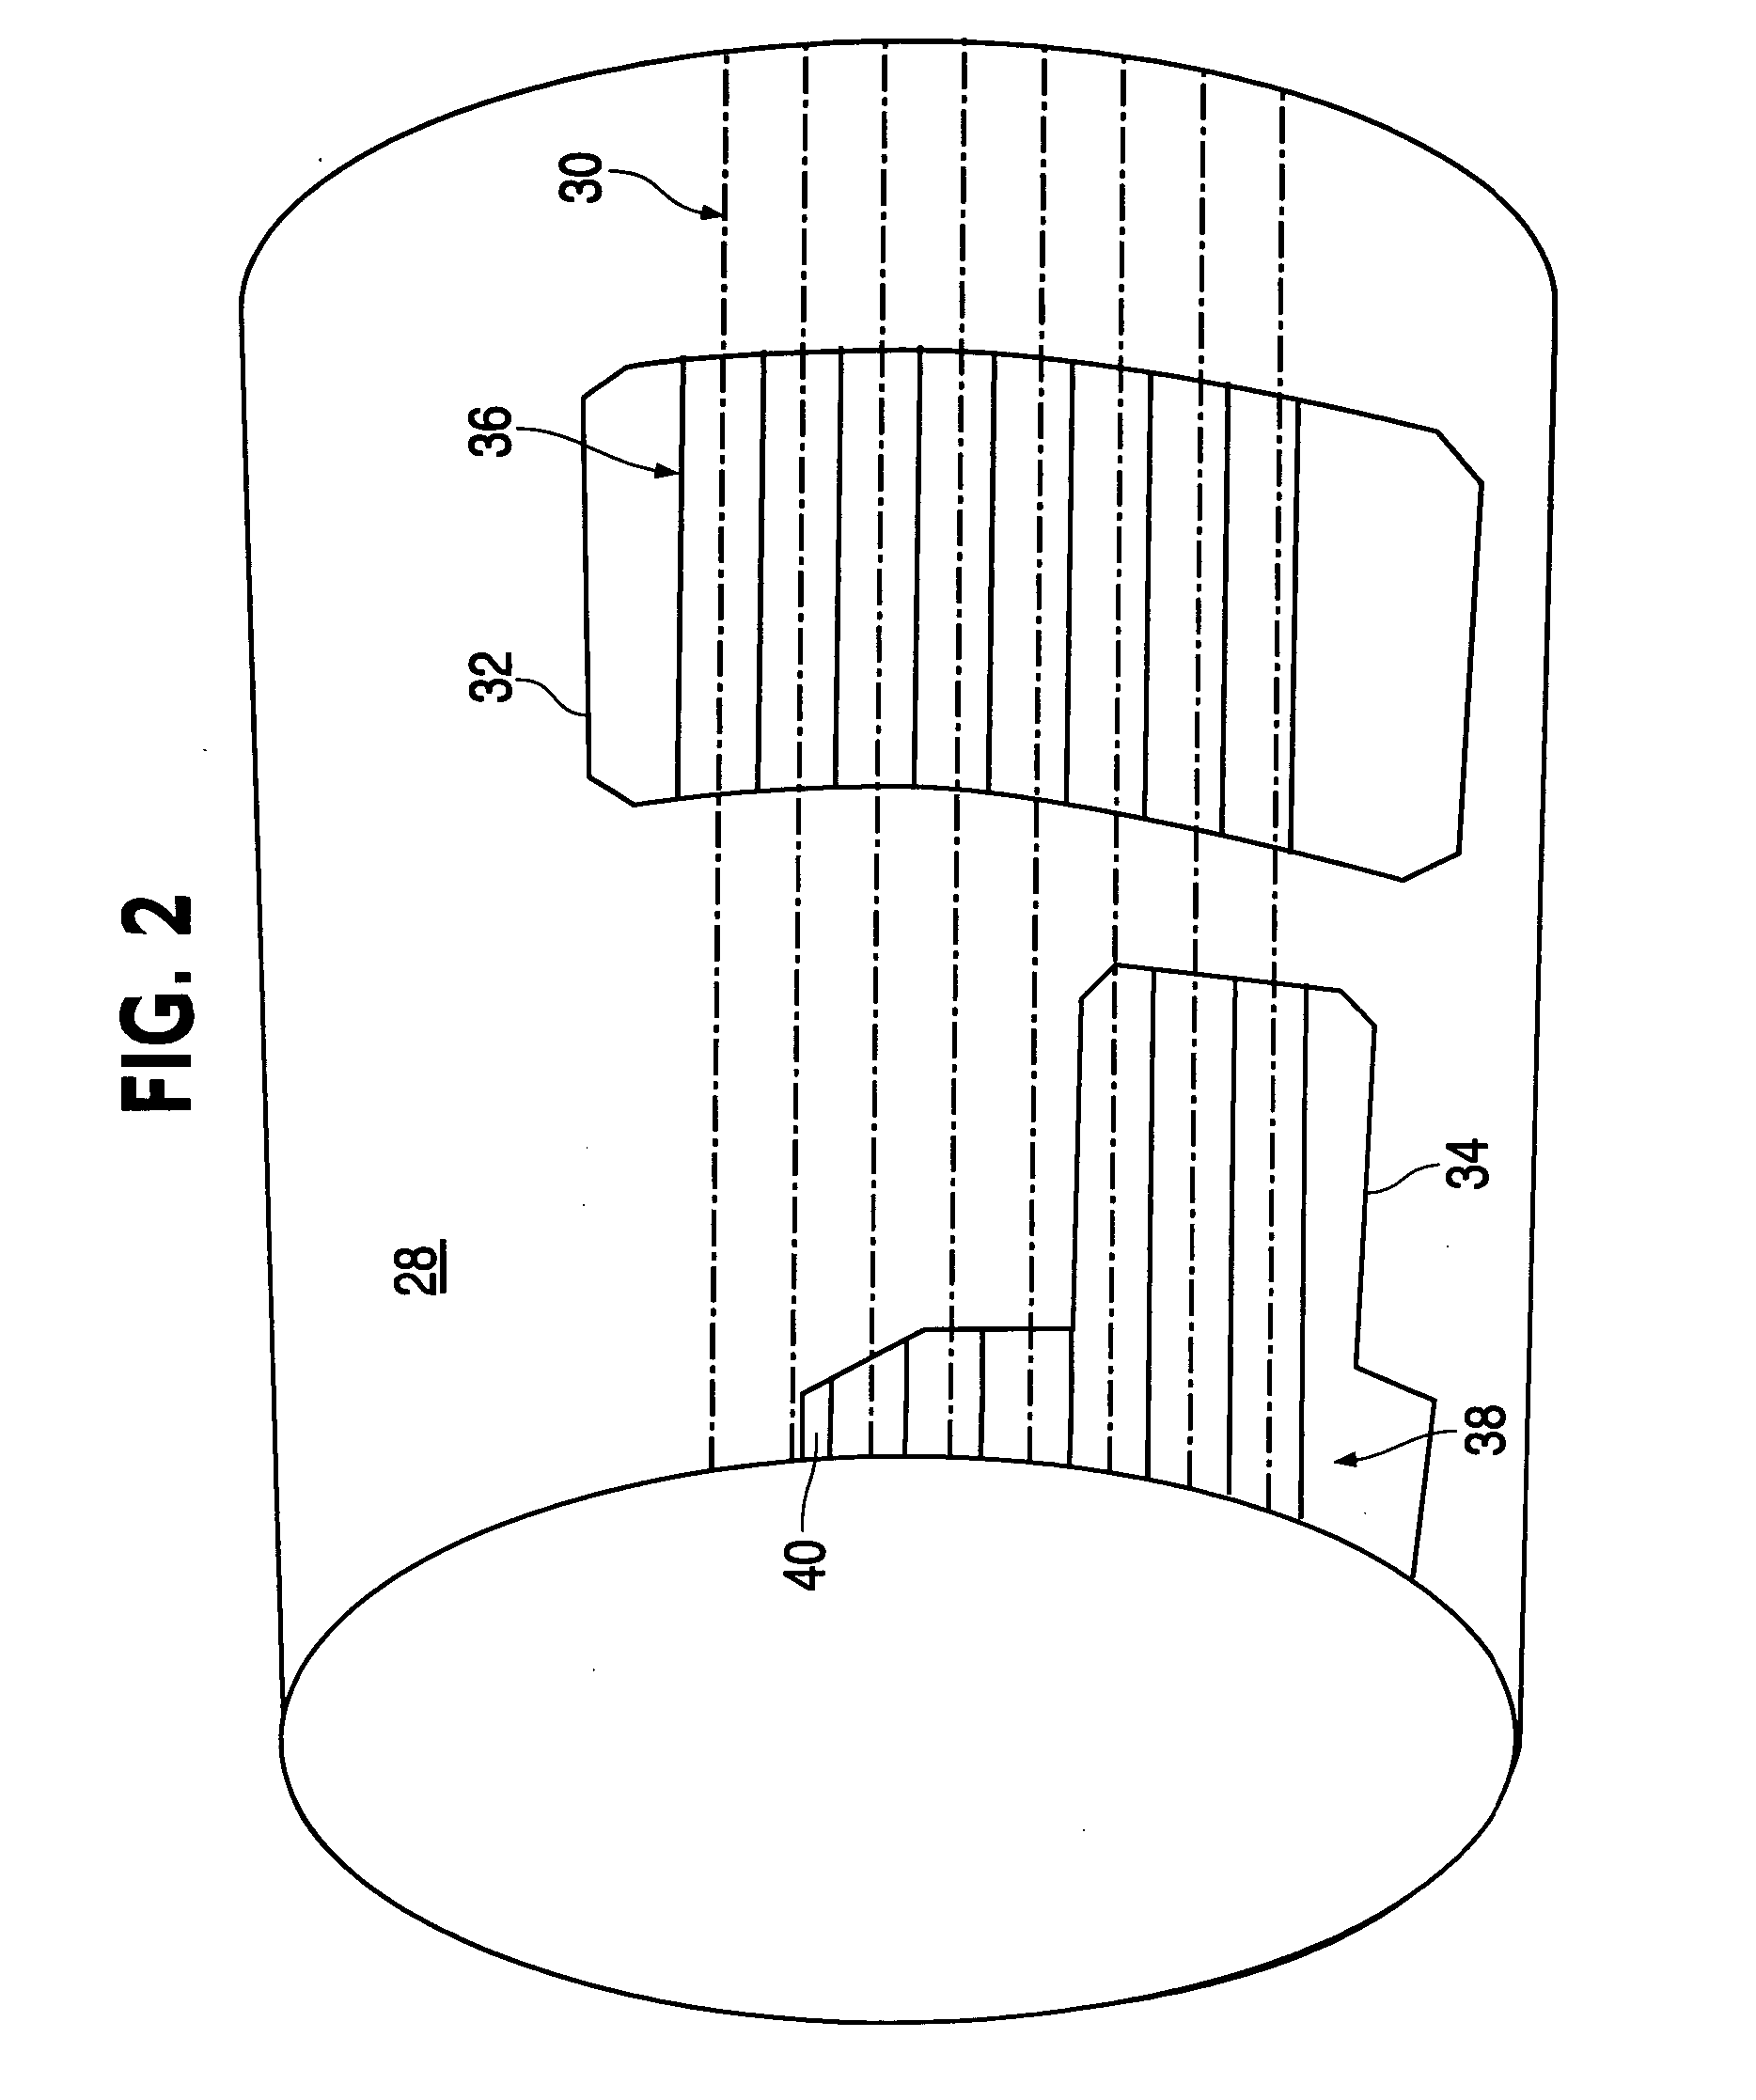 Multihead composite material application machine programming method and apparatus for manufacturing composite structures